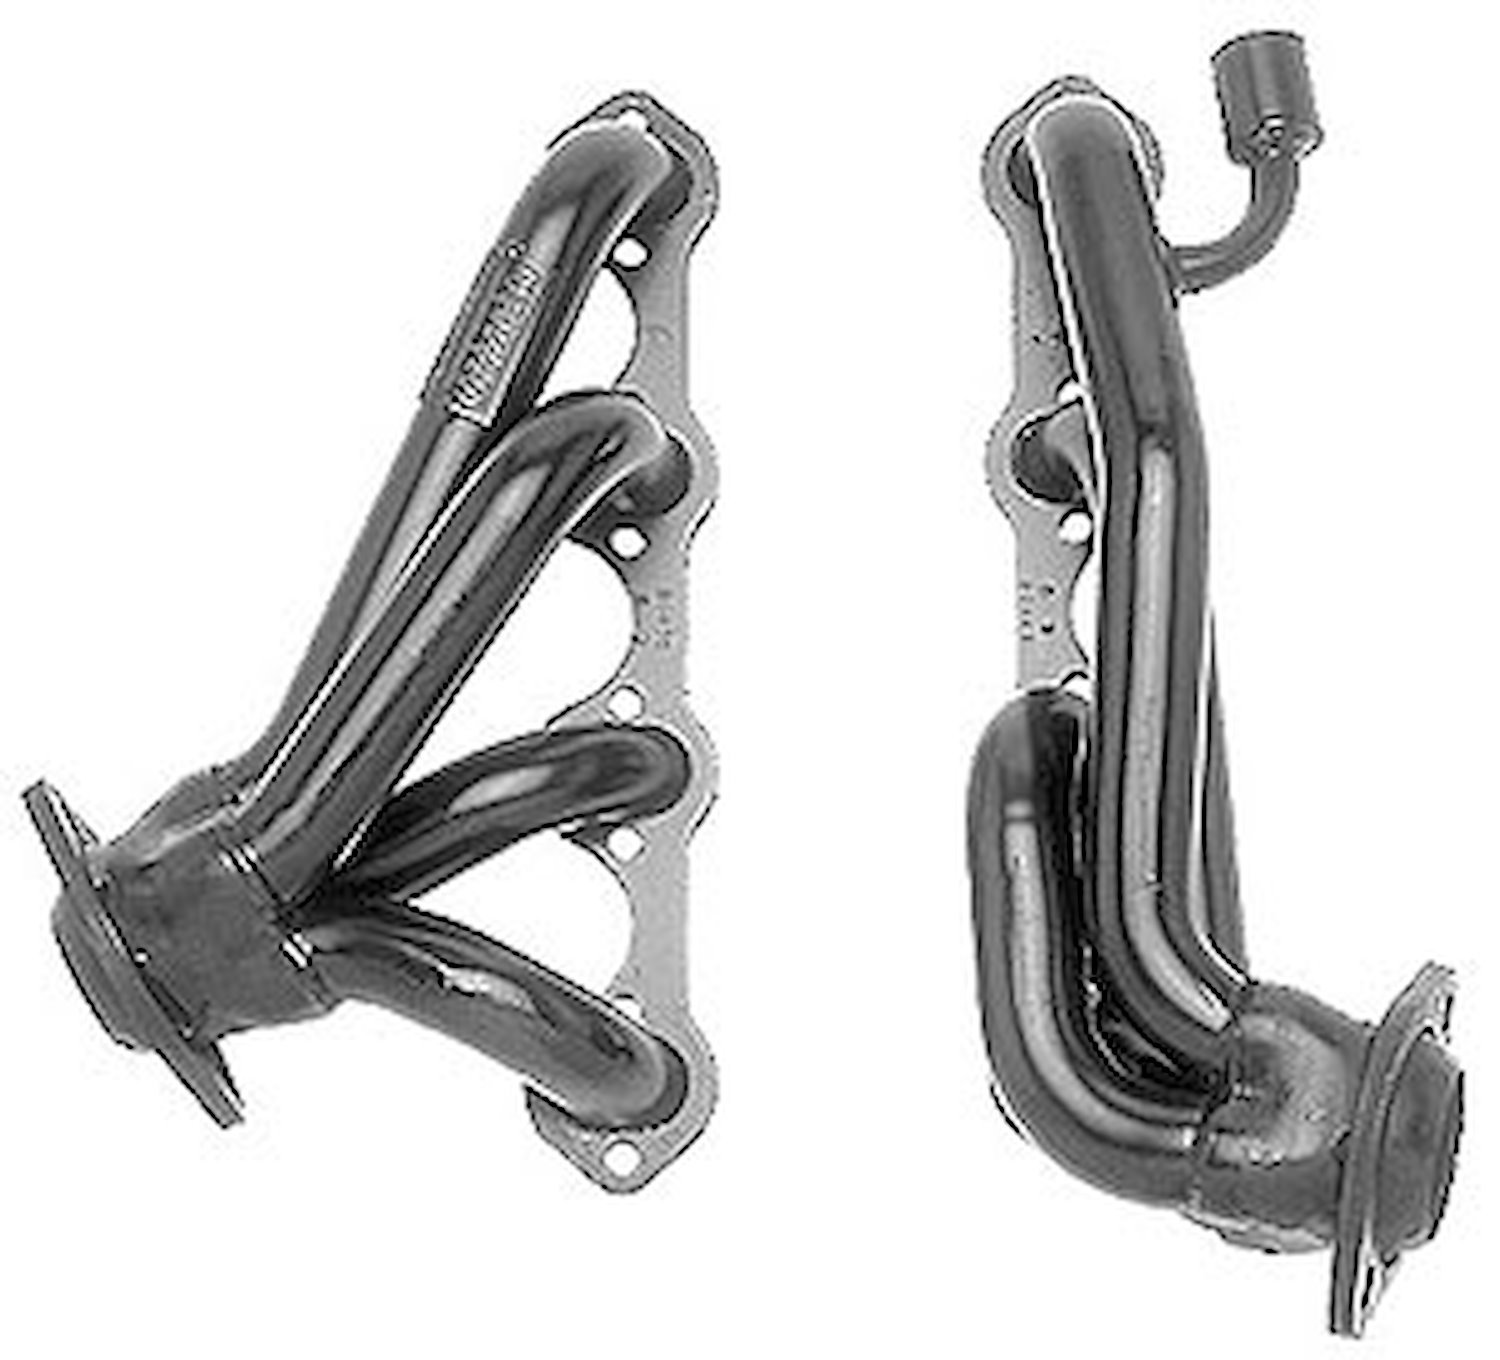 Standard Duty HTC Coated Shorty Headers 1986-96 Ford F-150/250/350 & Bronco 5.8L